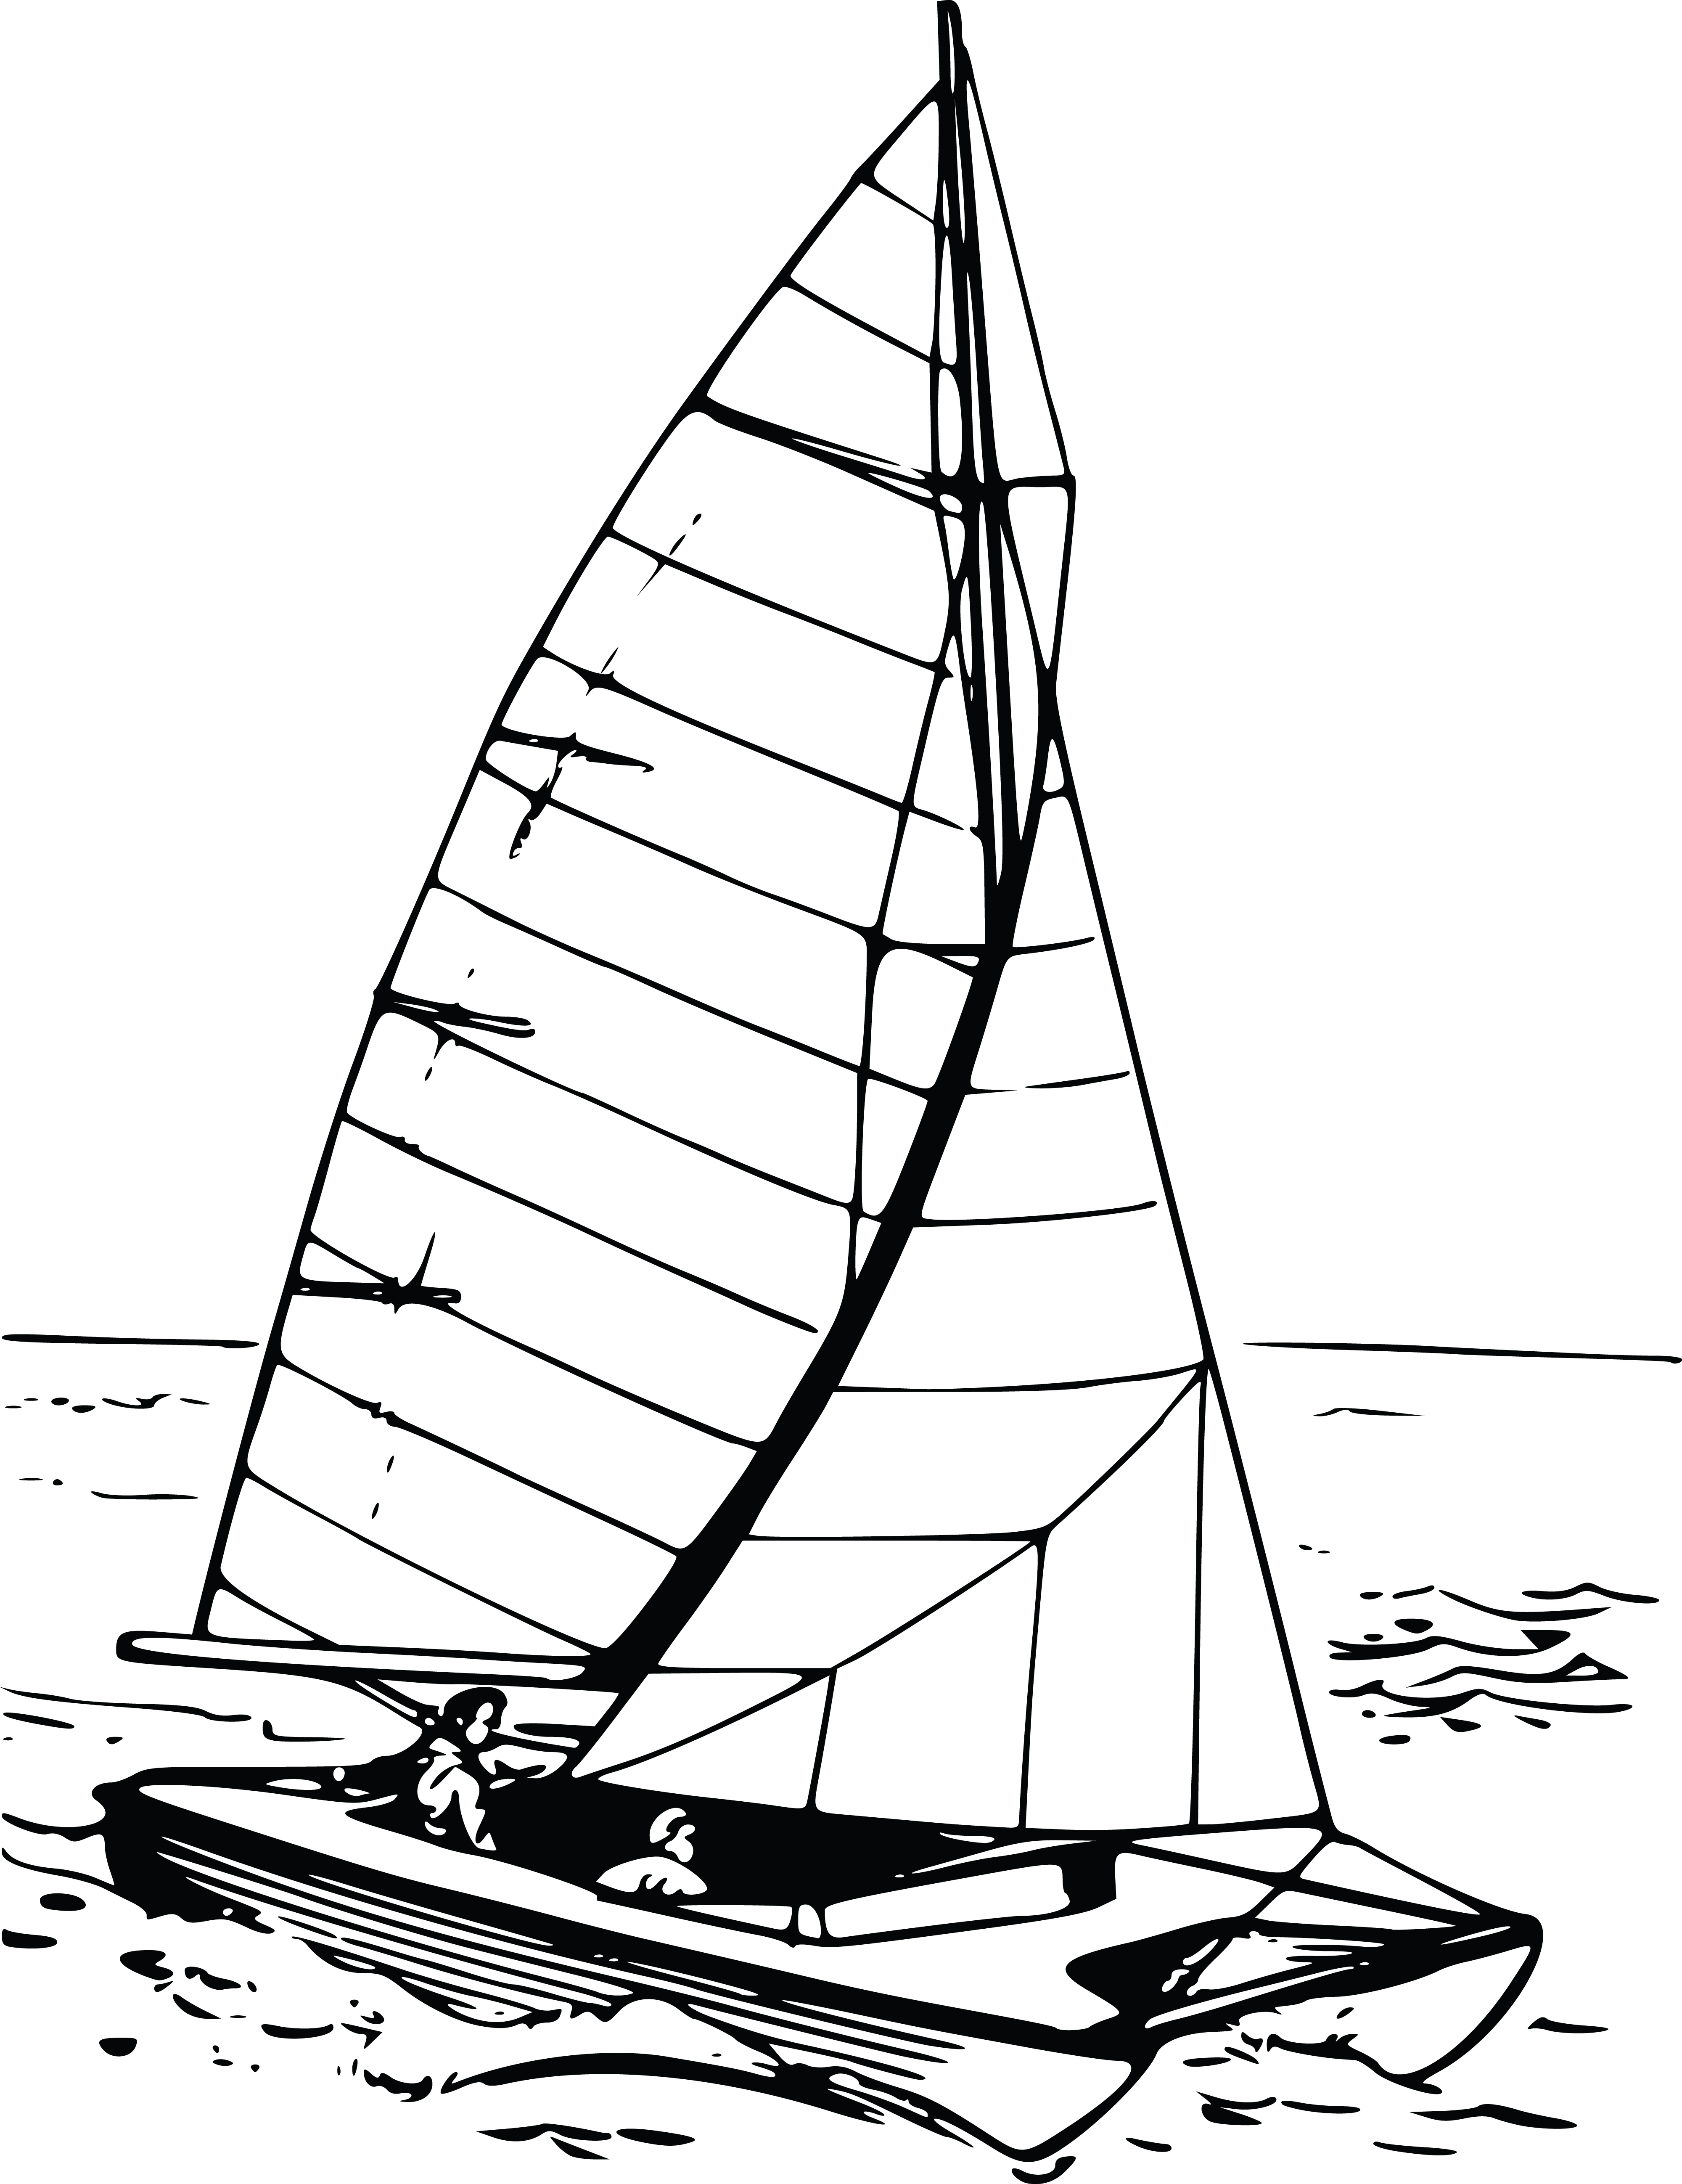 boat racing clipart - photo #45